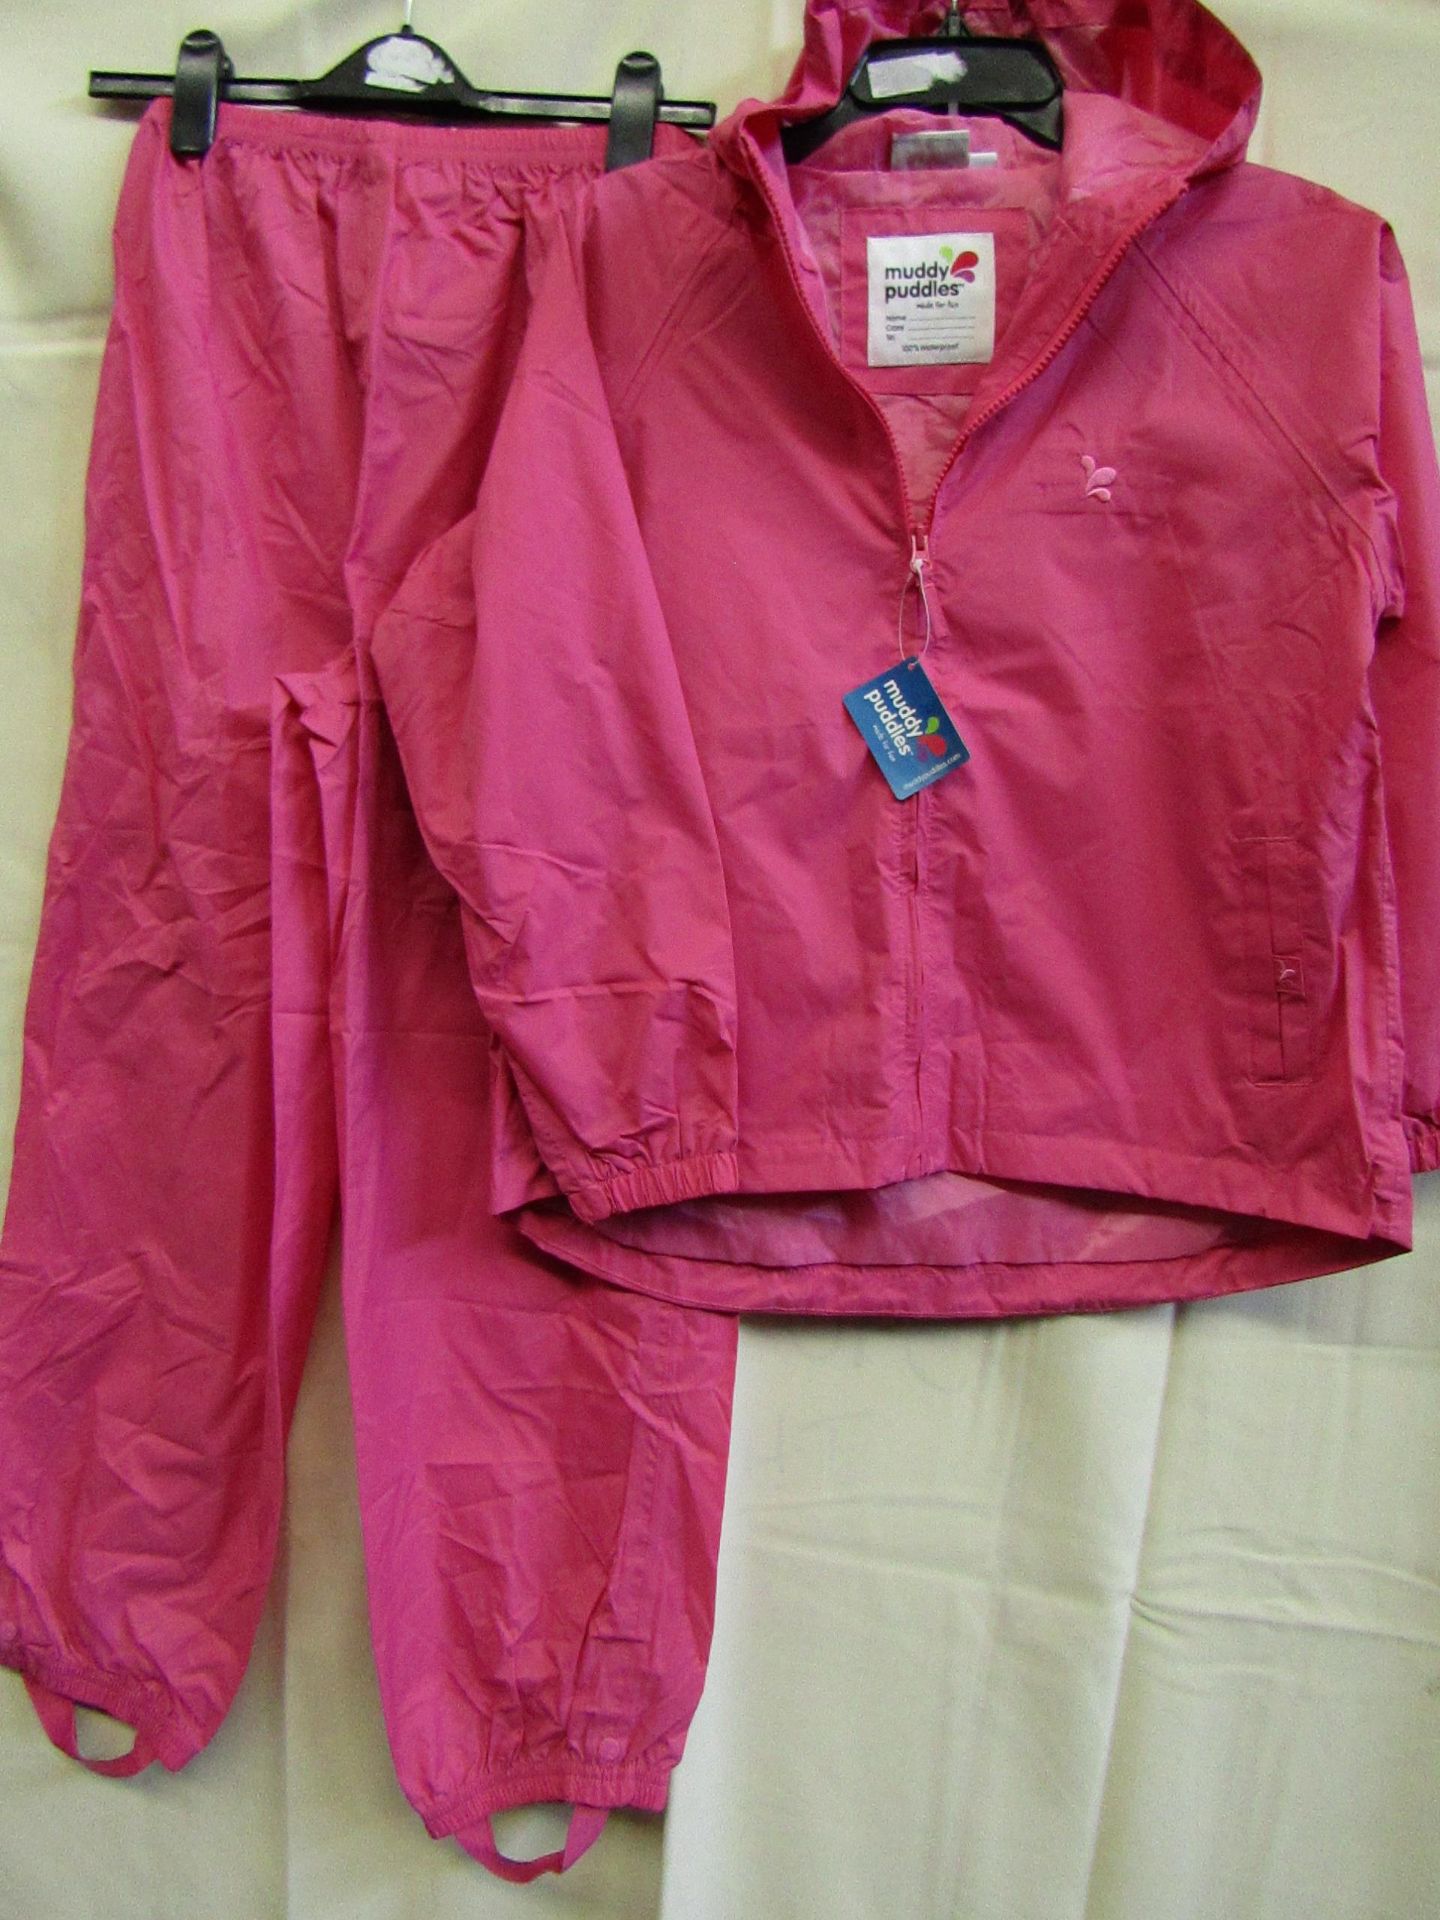 Muddy Puddles Waterproof Jacket & Pants Pink Aged 11-12 yrs New & Packaged